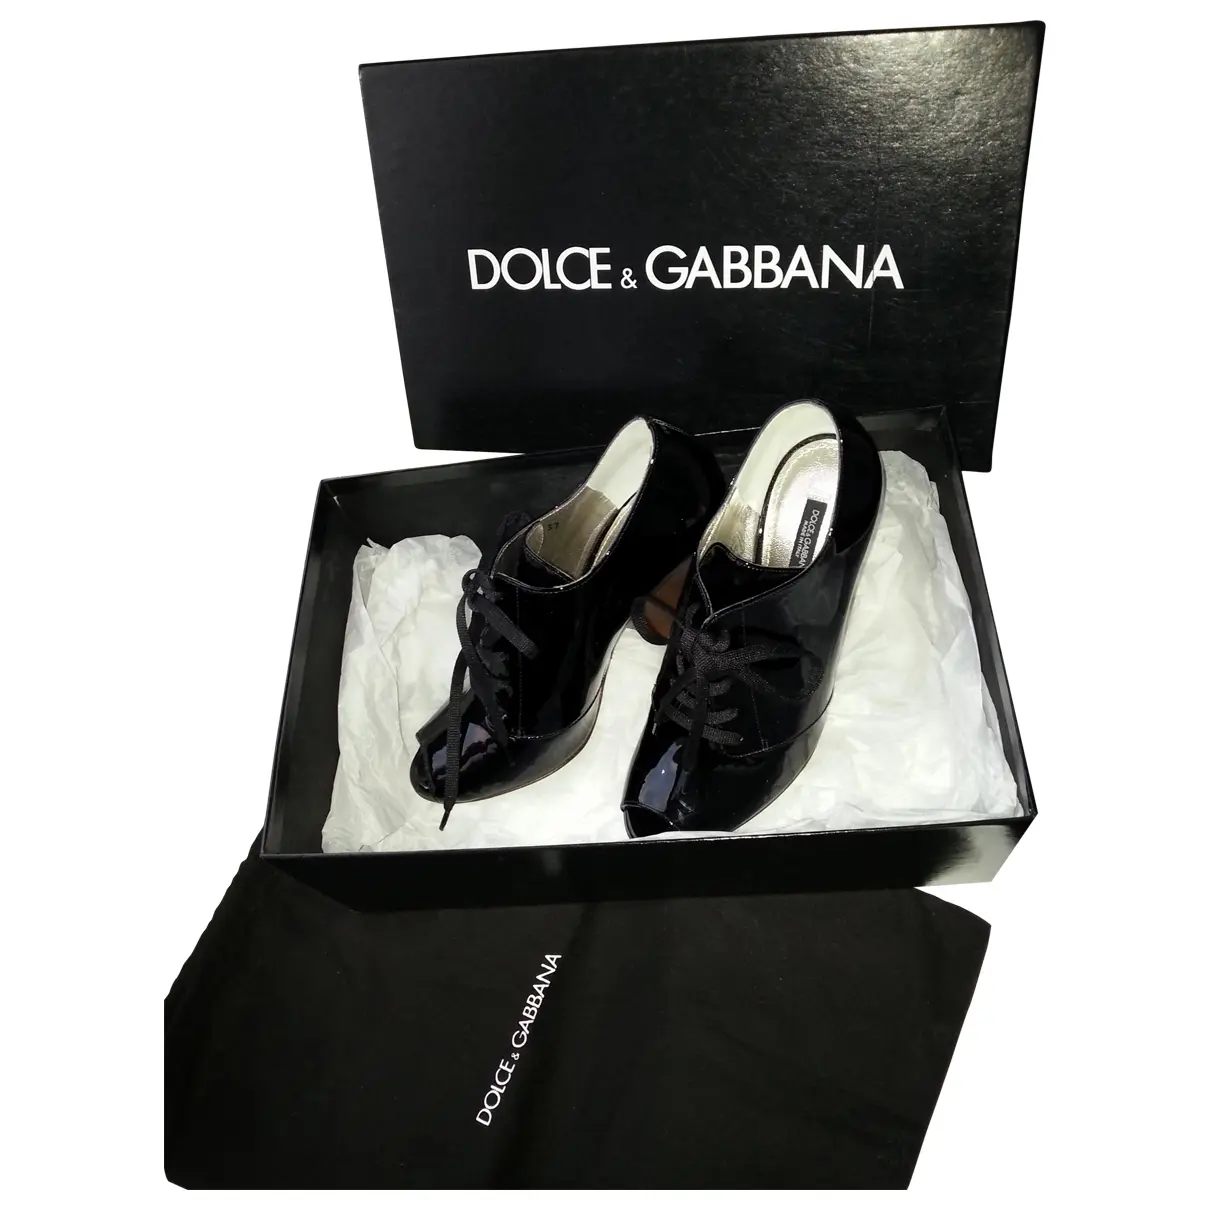 Dolce & Gabbana Black Patent leather Boots for sale